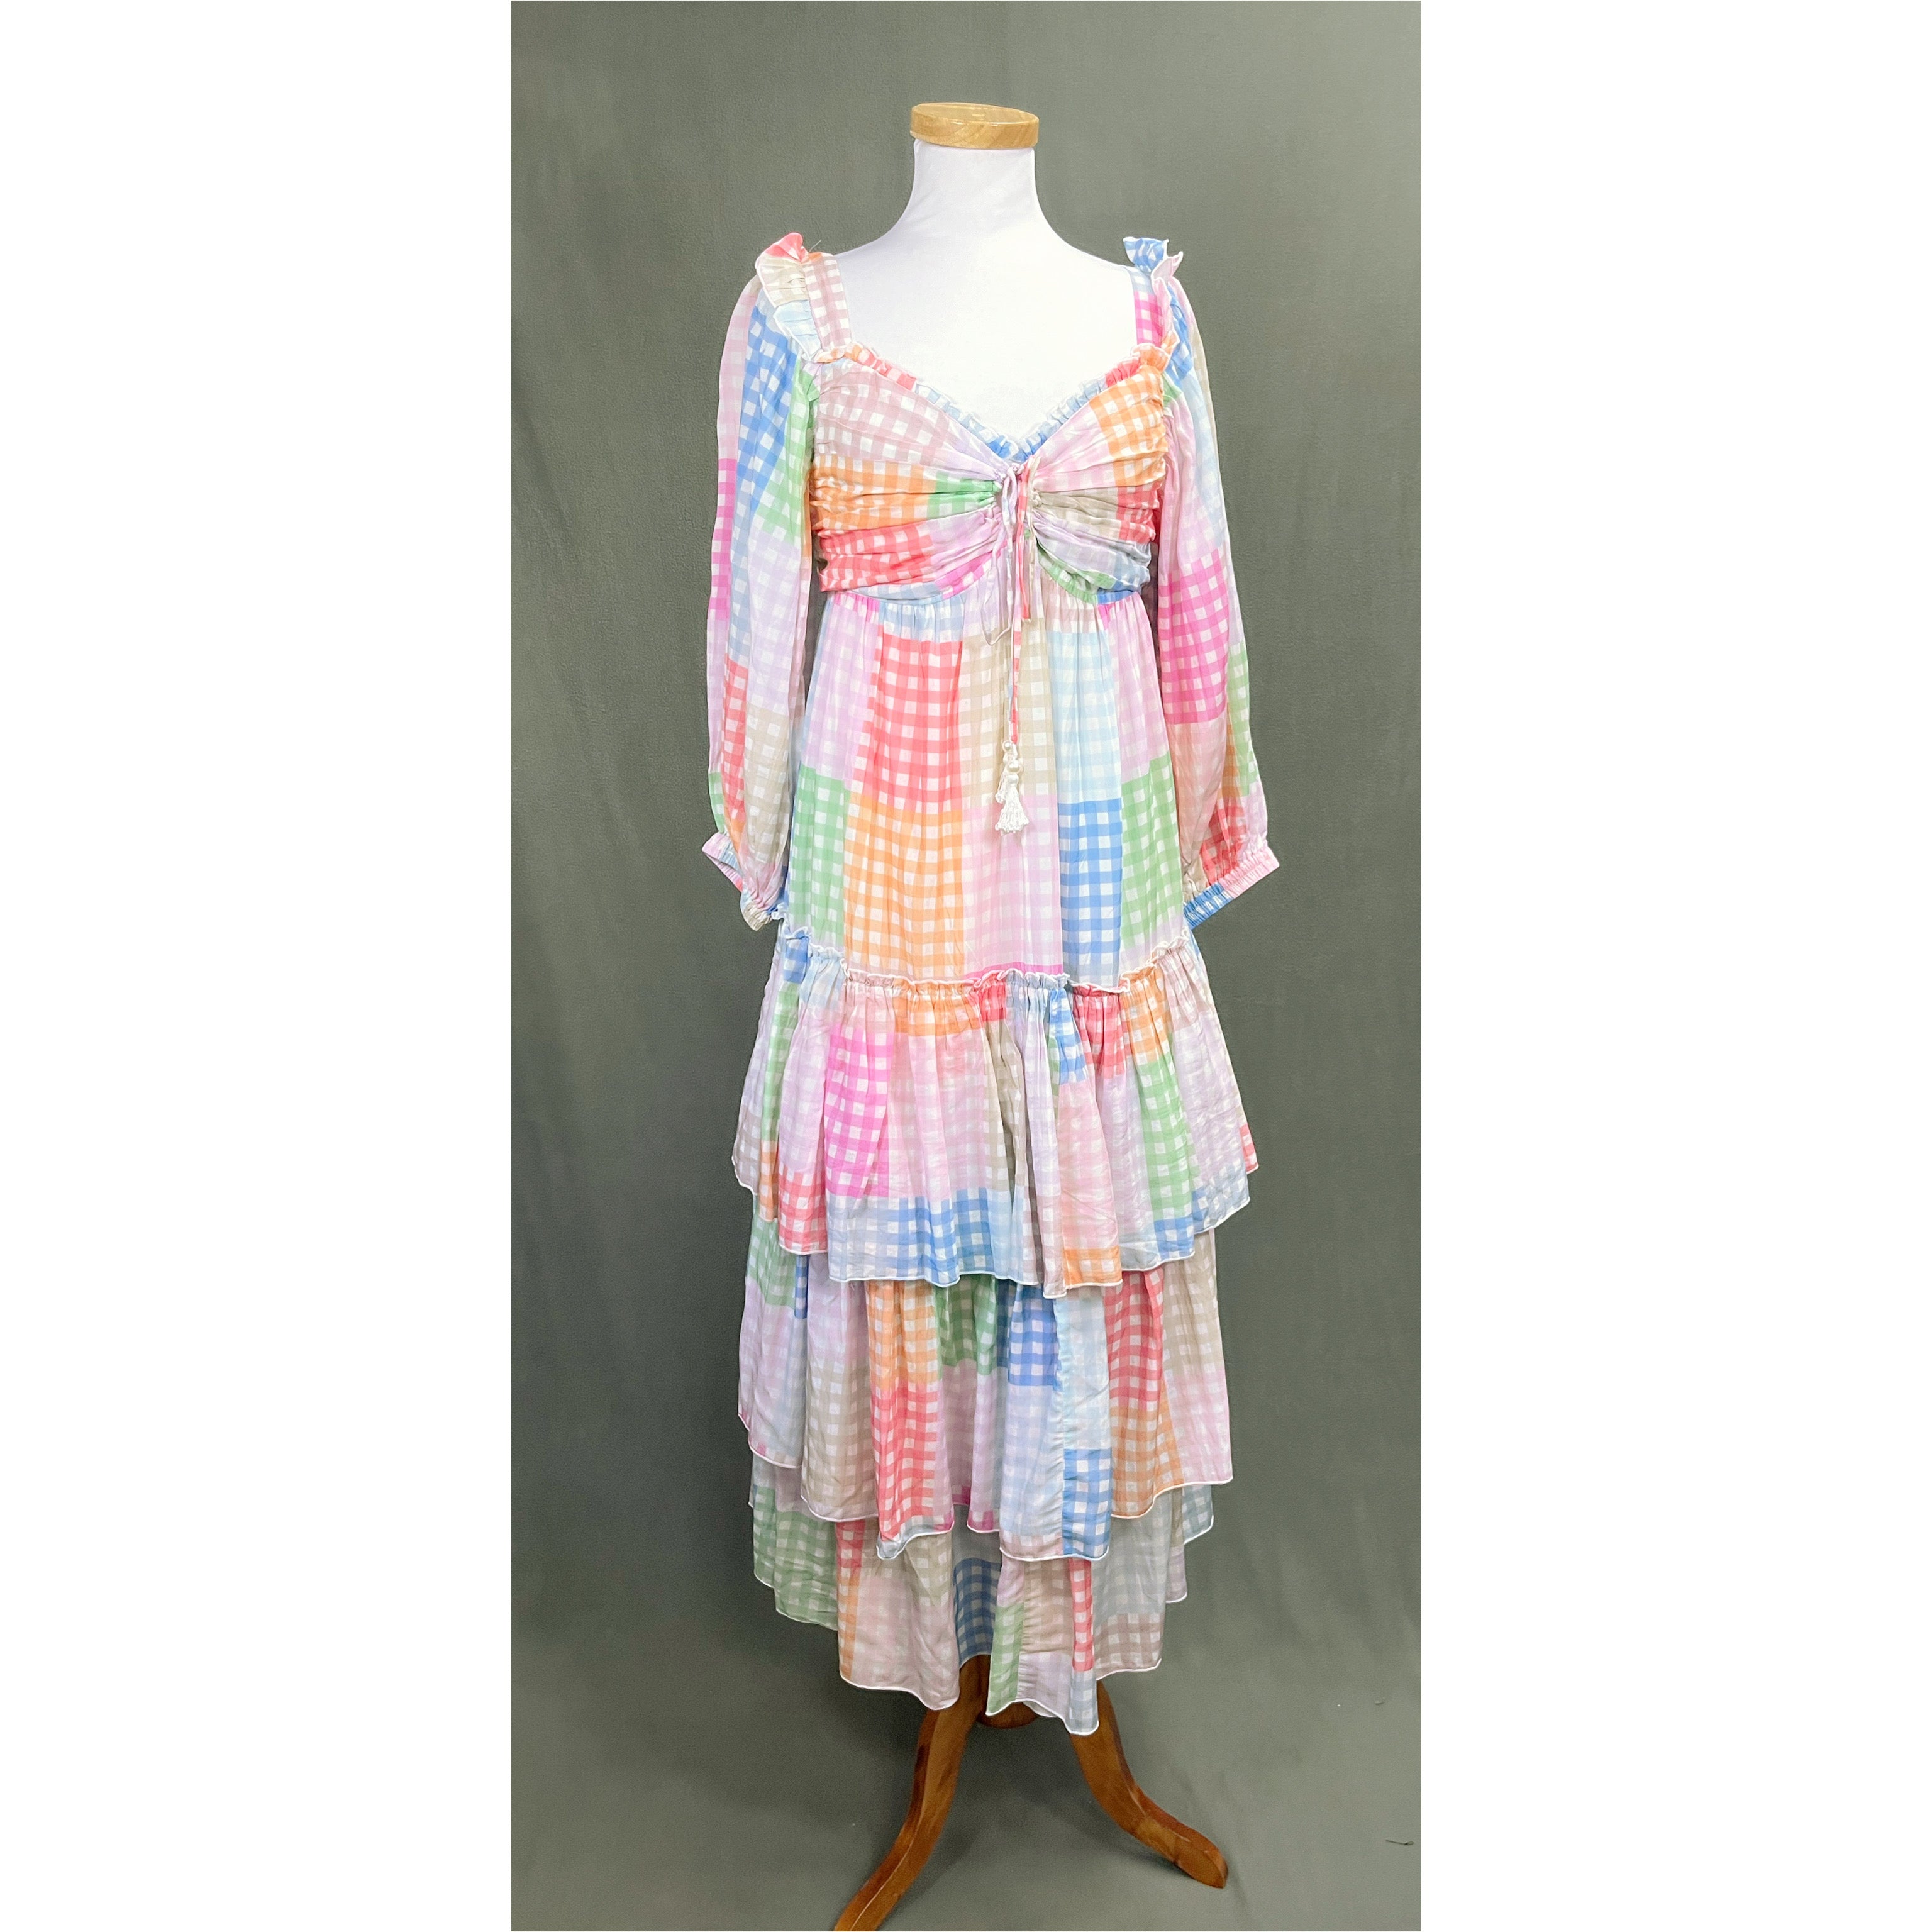 Free People multi-color Aileen gingham dress, size M, NEW WITH TAGS!